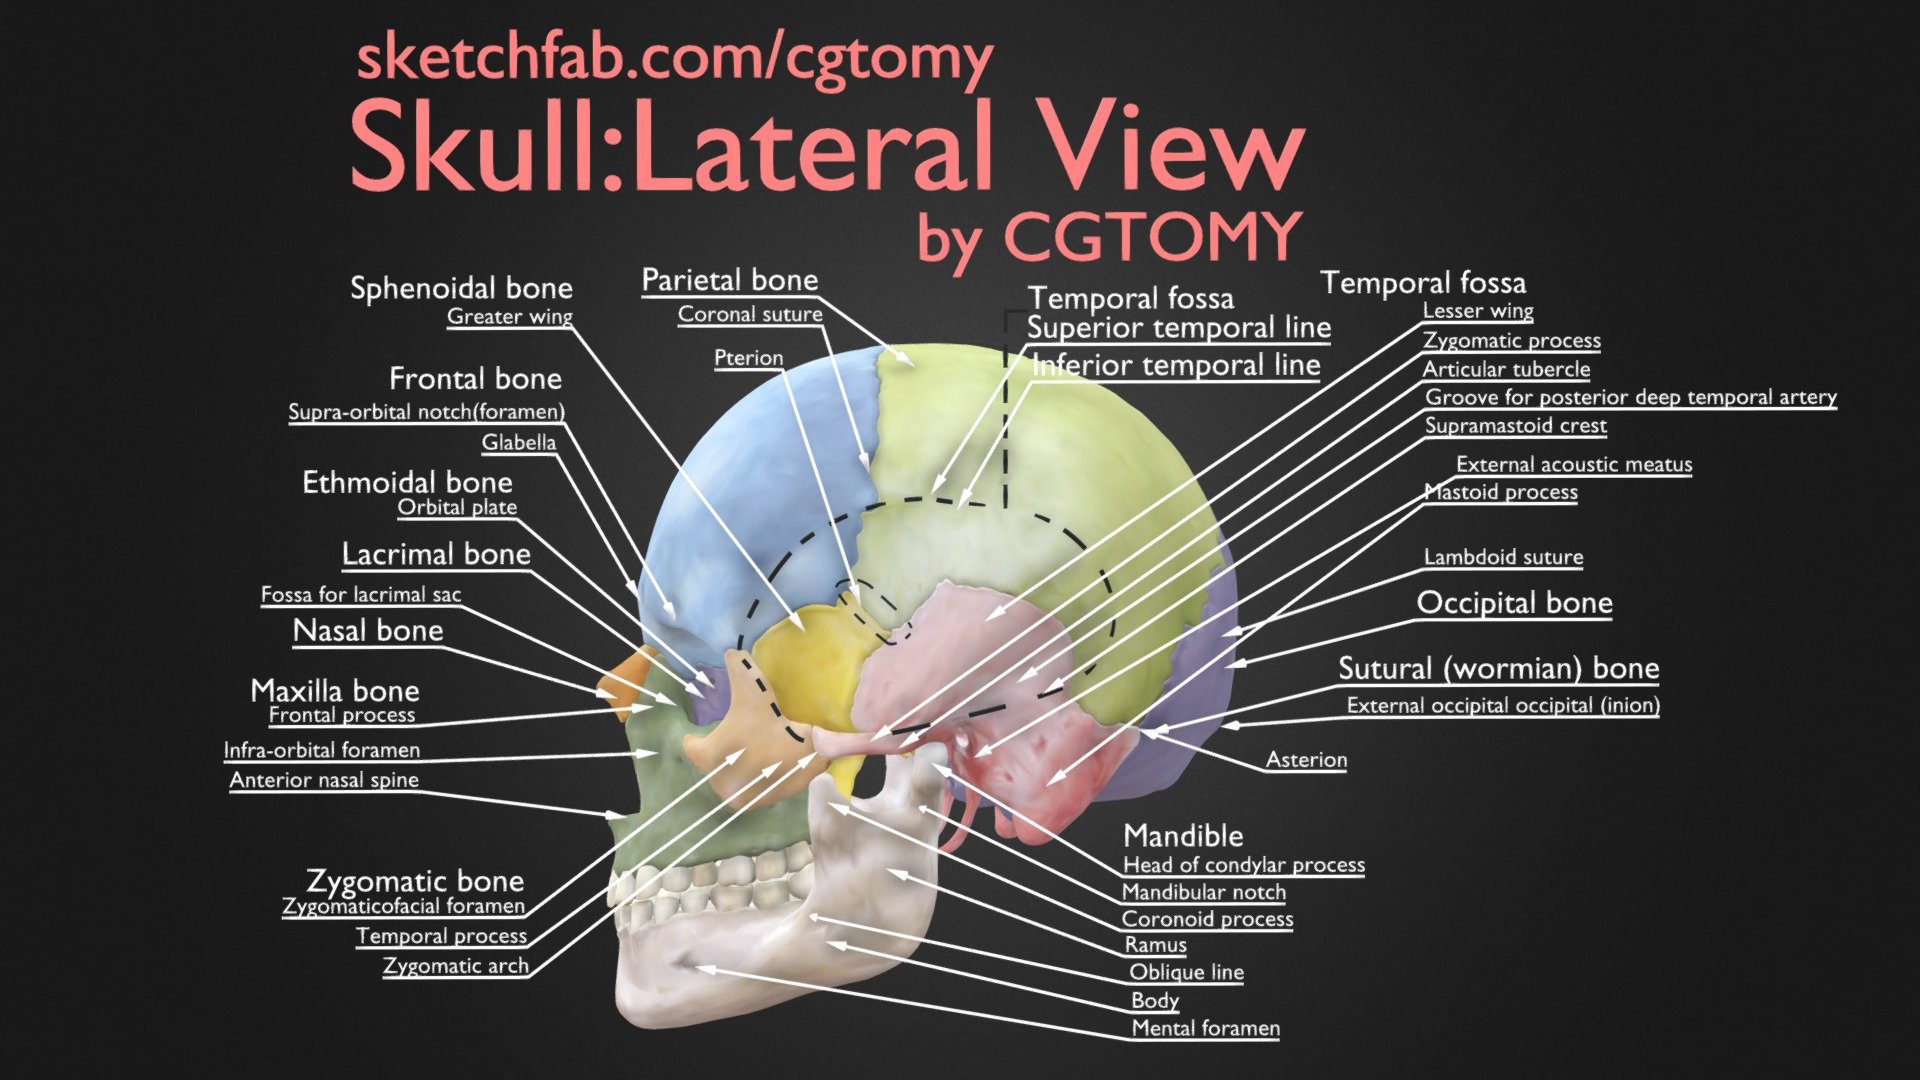 Skull Lateral View Buy Royalty Free 3d Model By Cgtomy A544092 Sketchfab Store 6463